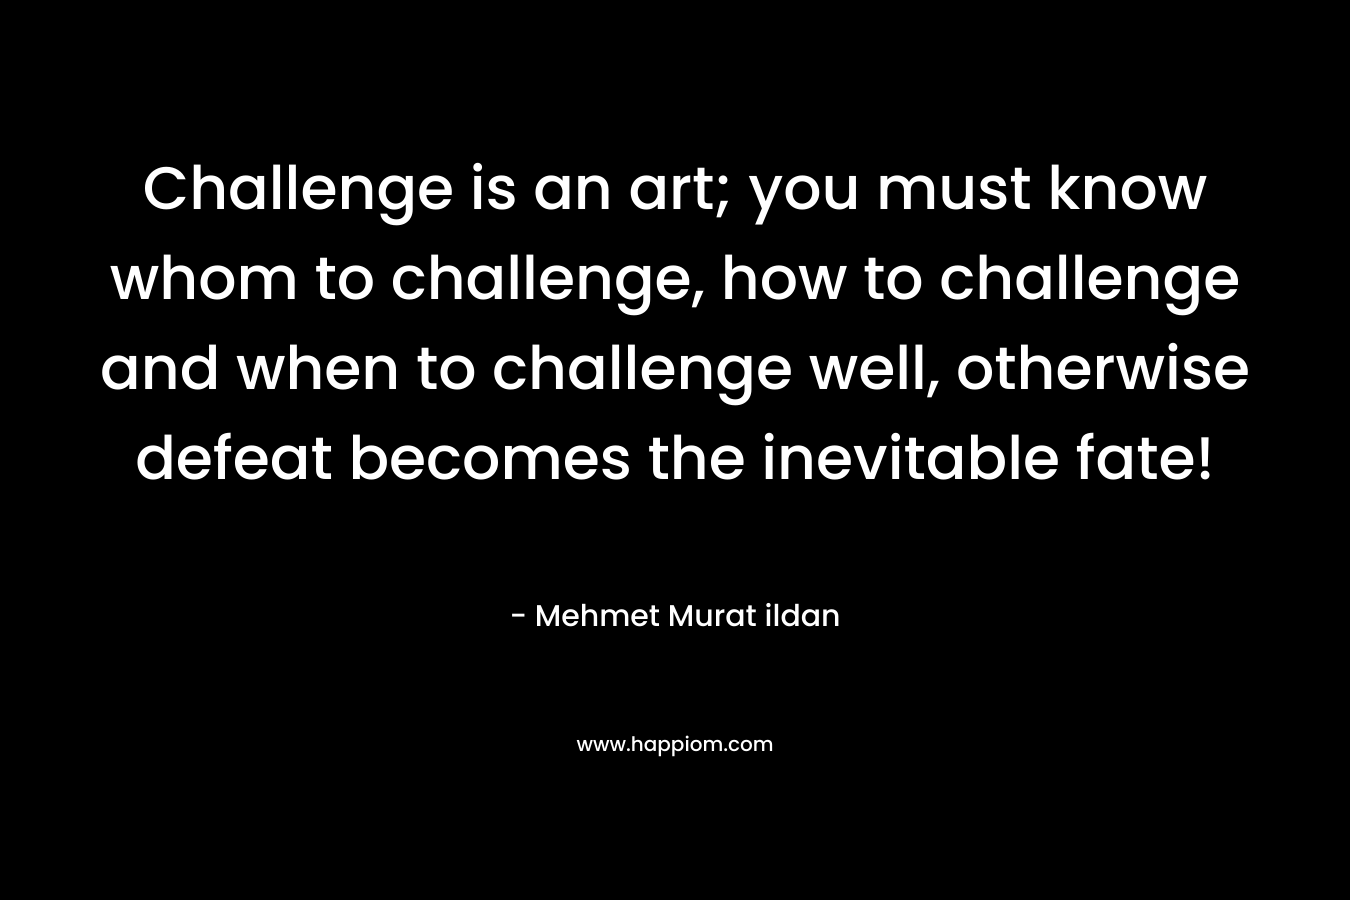 Challenge is an art; you must know whom to challenge, how to challenge and when to challenge well, otherwise defeat becomes the inevitable fate! – Mehmet Murat ildan